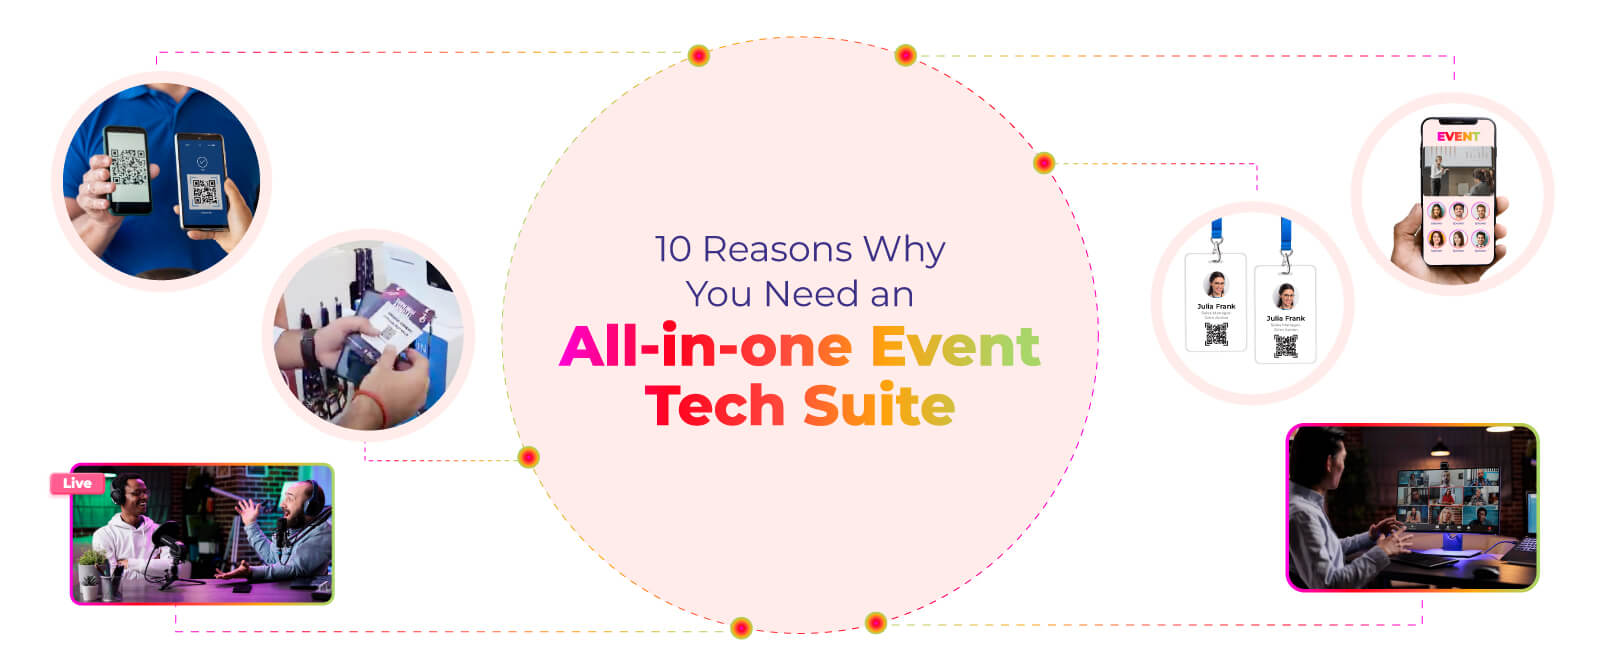 10 Reasons Why You Need an All-in-one Event Tech Suite